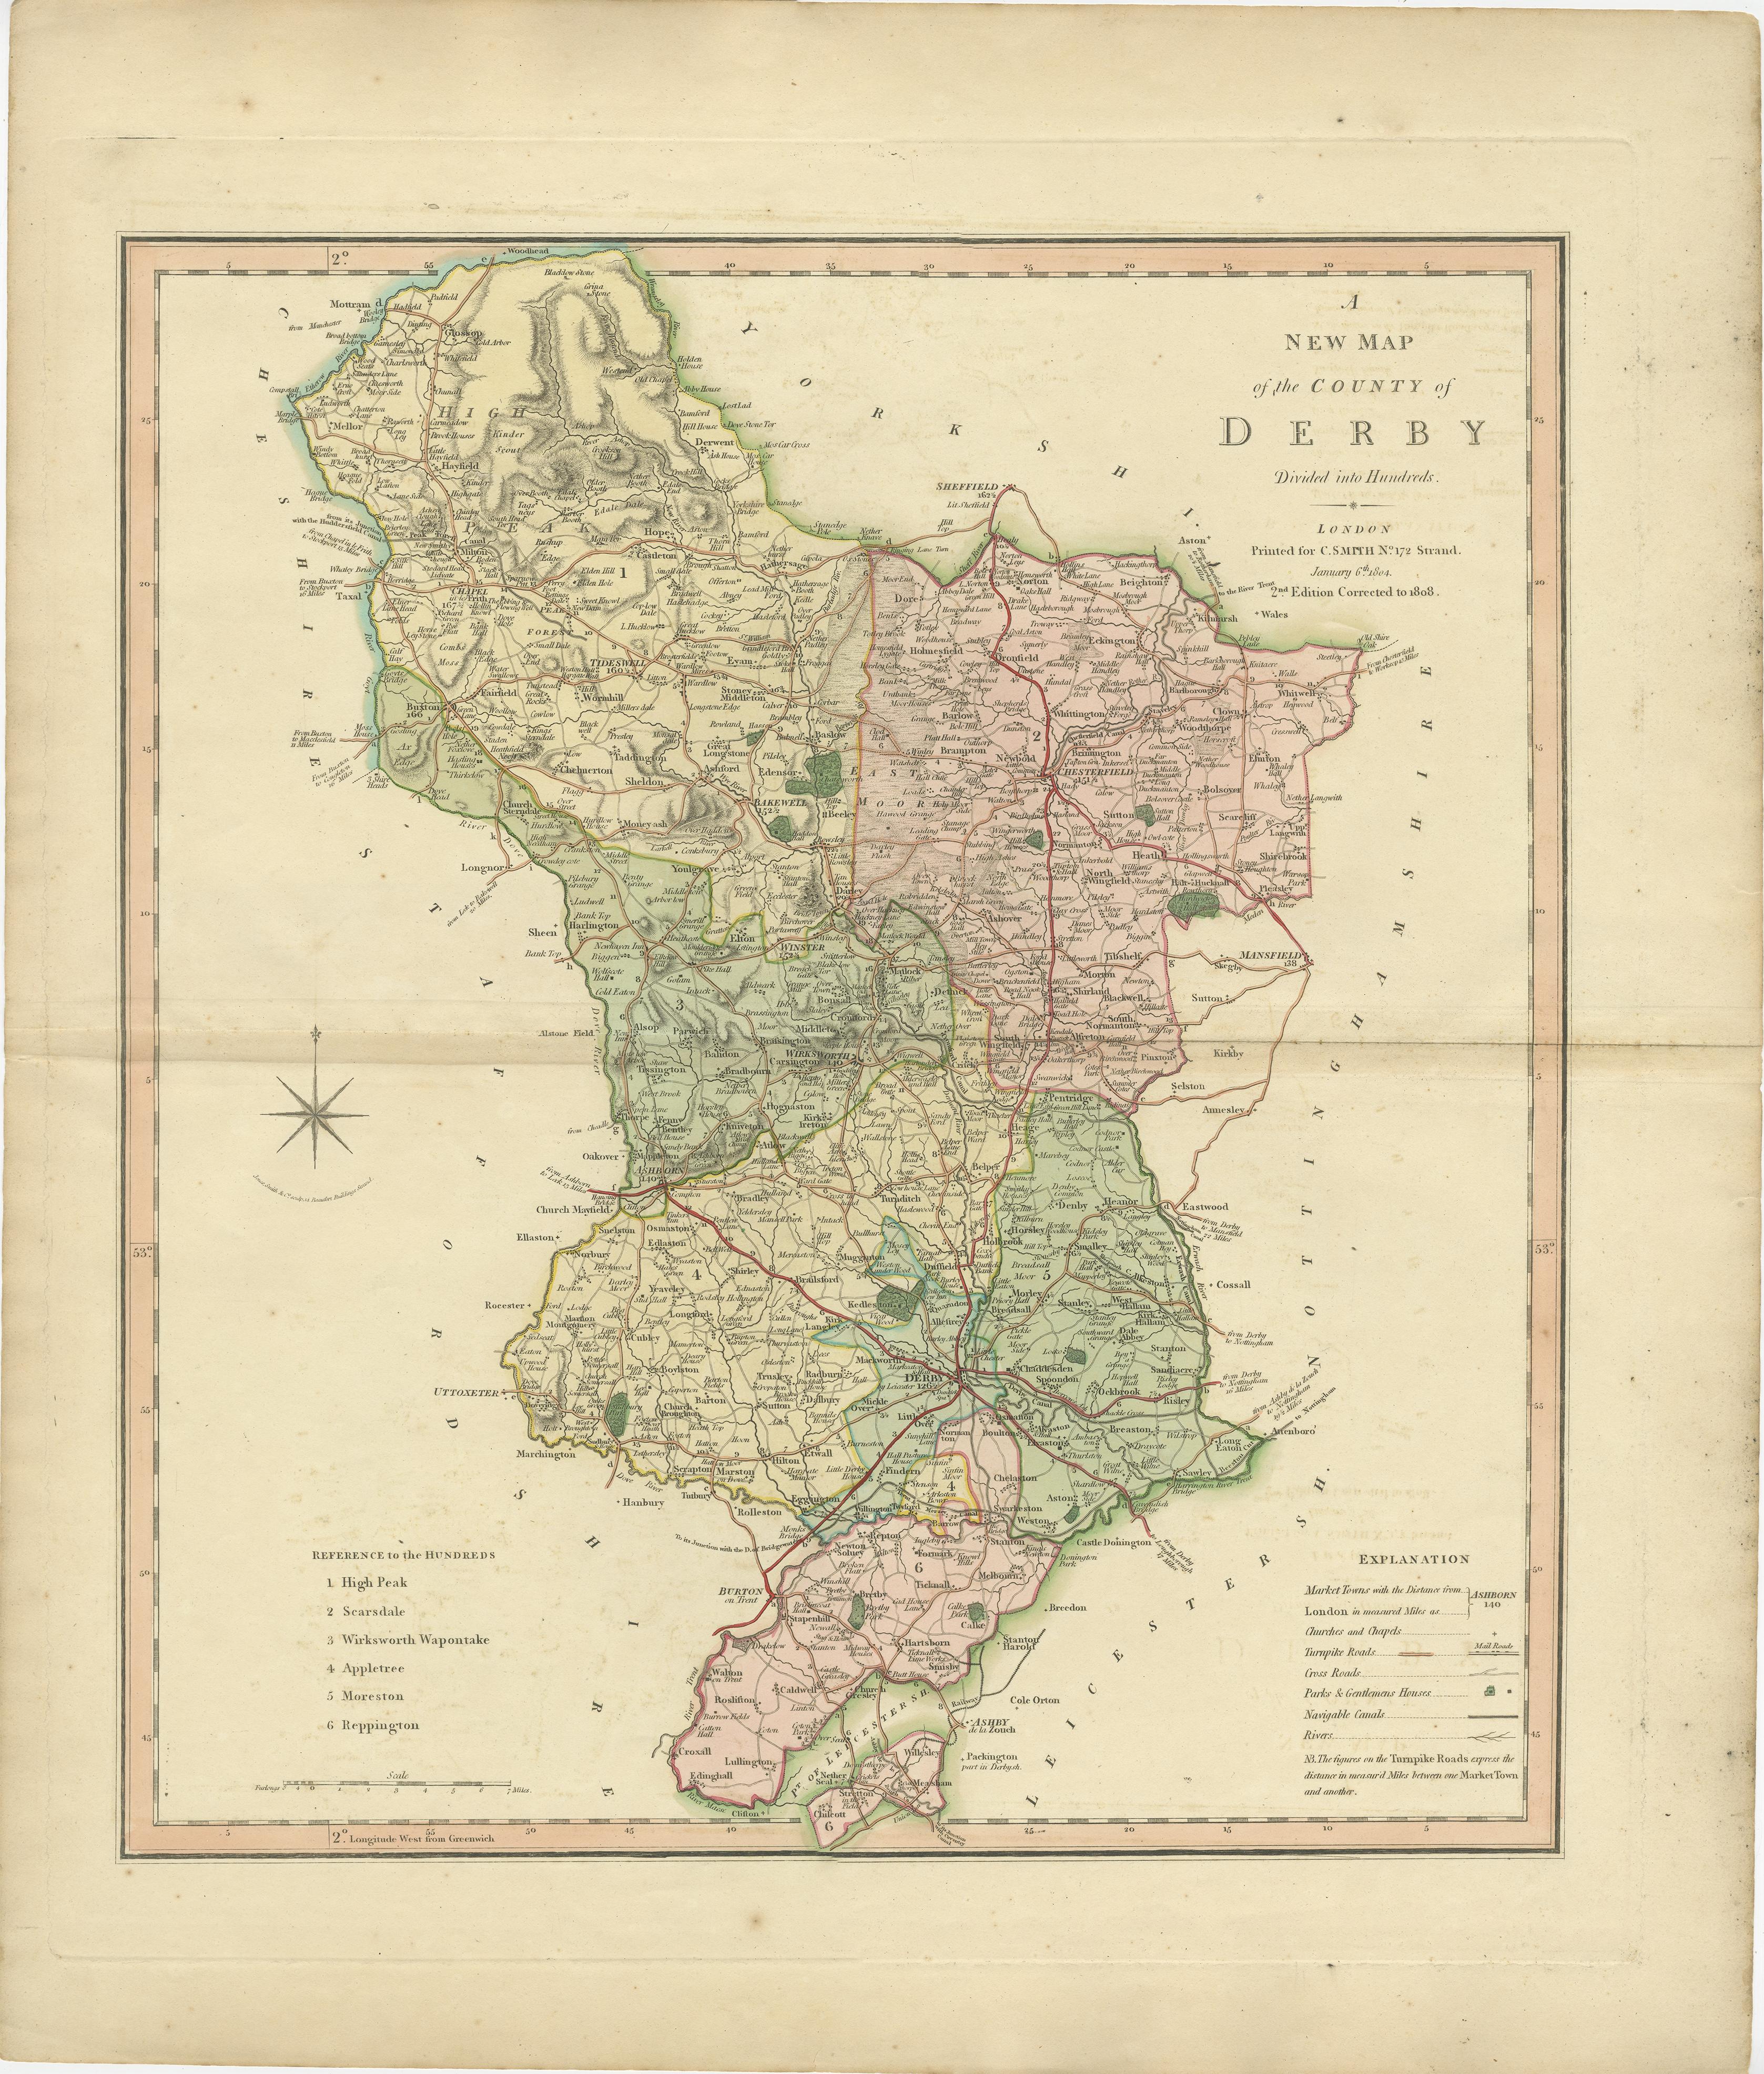 Antique county map of Derbyshire first published, circa 1800. Villages, towns, and cities illustrated include Chesterfield, Wirksworth, Derby, and Stanton.

Charles Smith was a cartographer working in London from circa 1800. His maps were finely